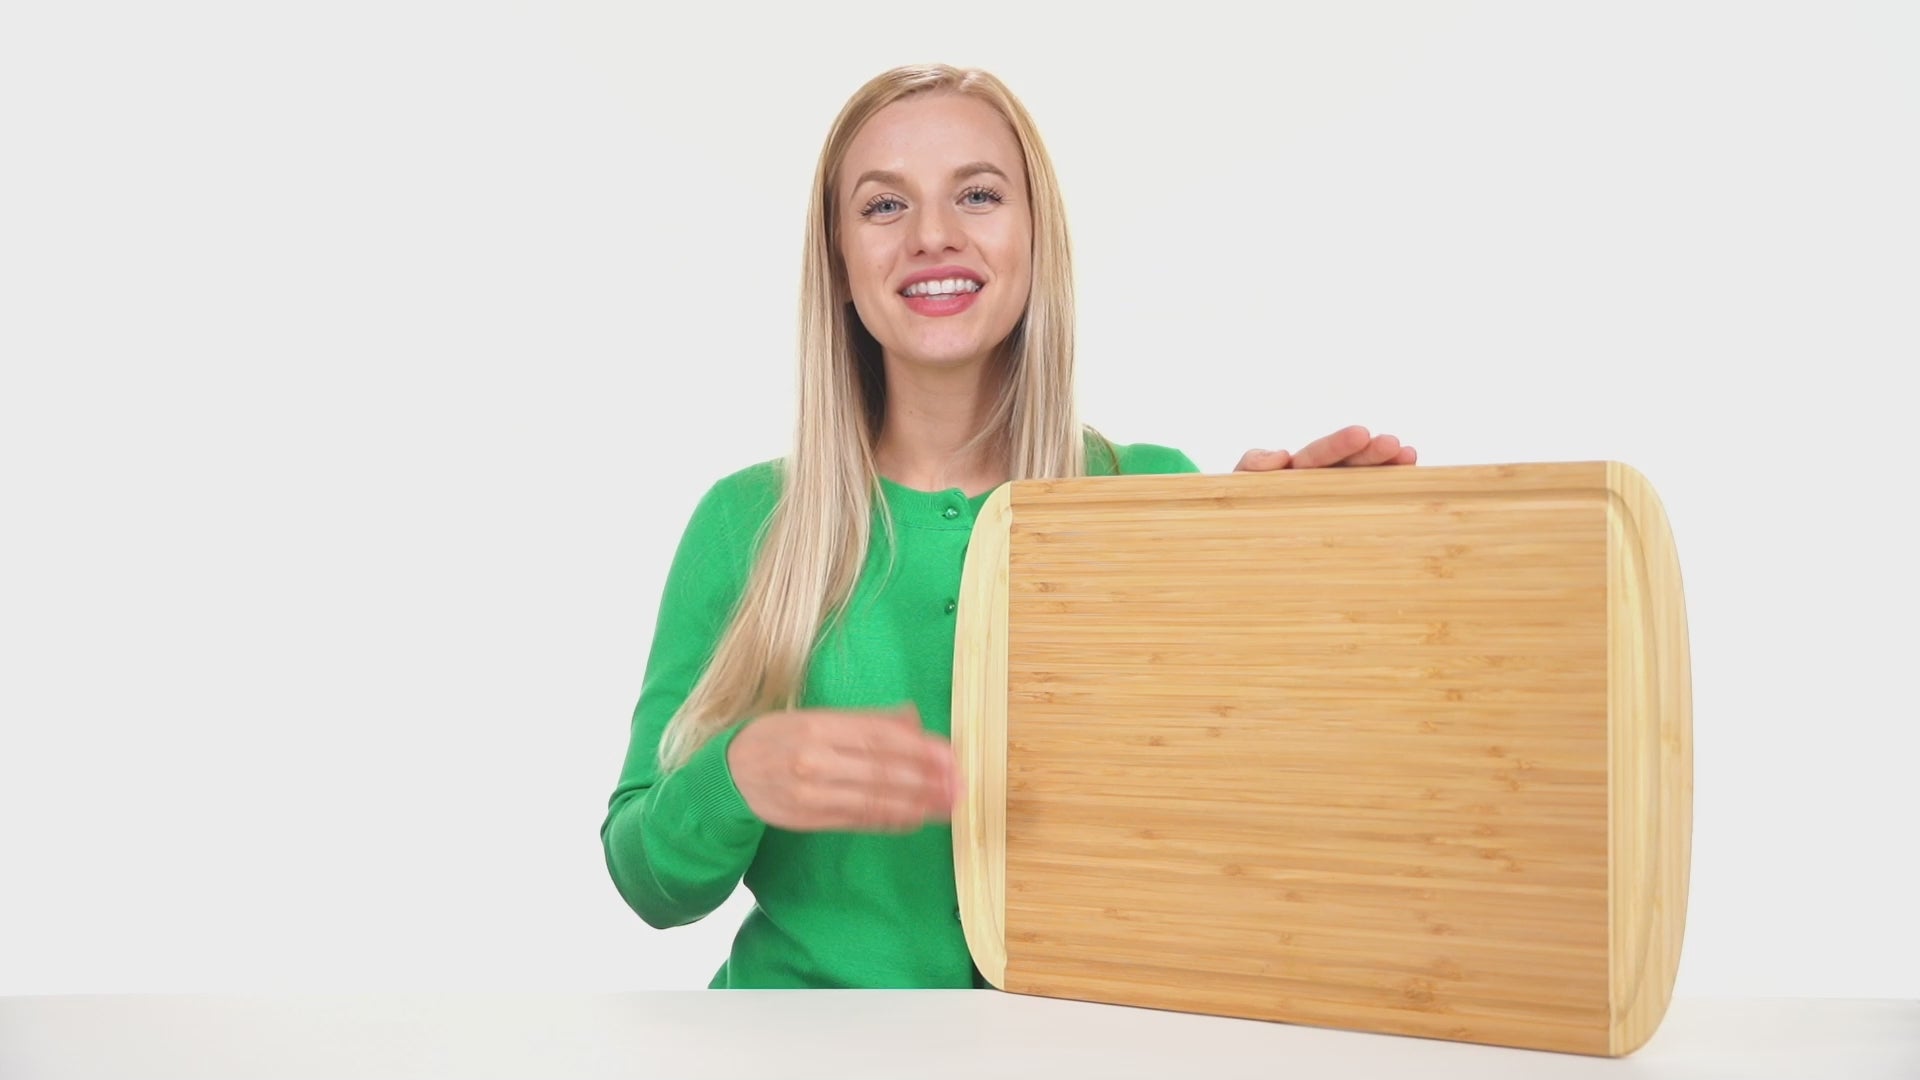 Greener Chef 30 inch 3XL Extra Large Cutting Board with Lifetime Replacements - Oversized Bamboo Stove Top Cover Noodle Board - Wooden Meat Cutting